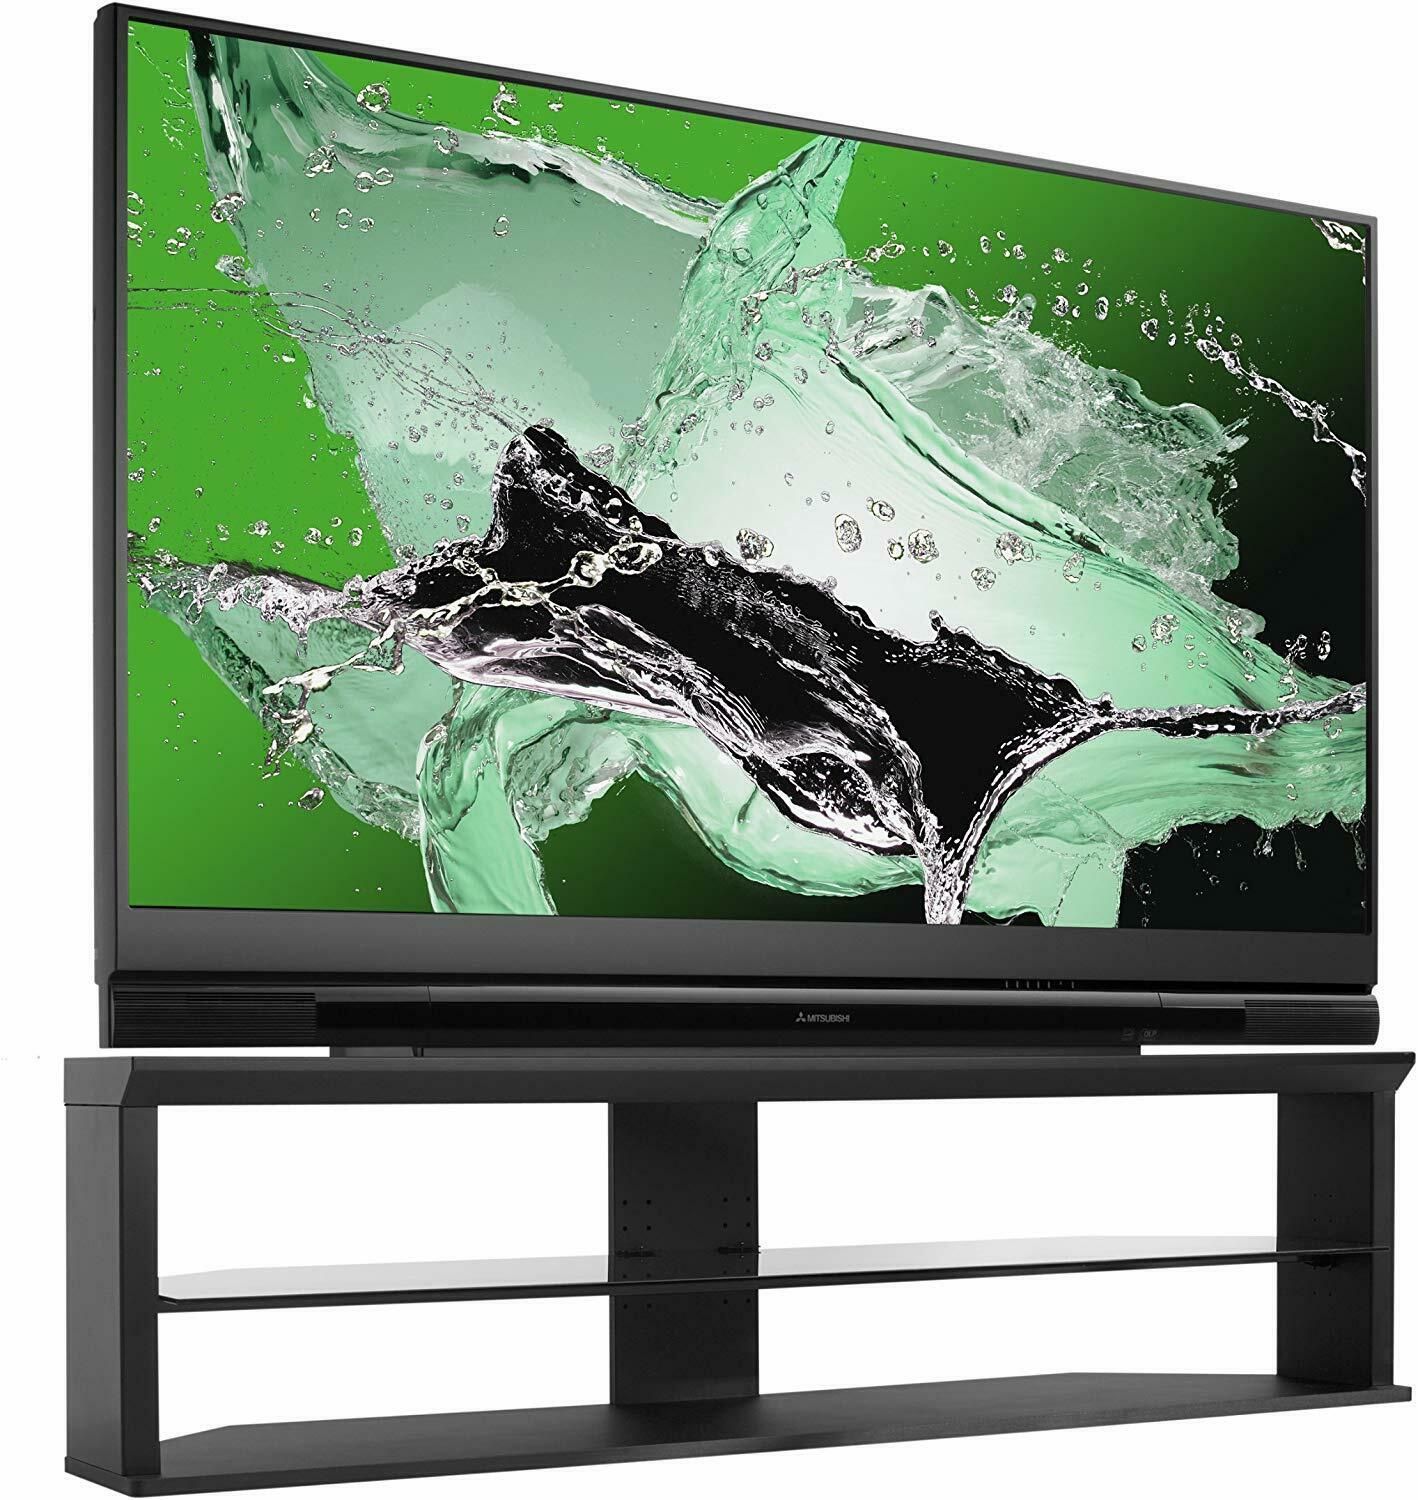 84” TV with 3D capabilities.